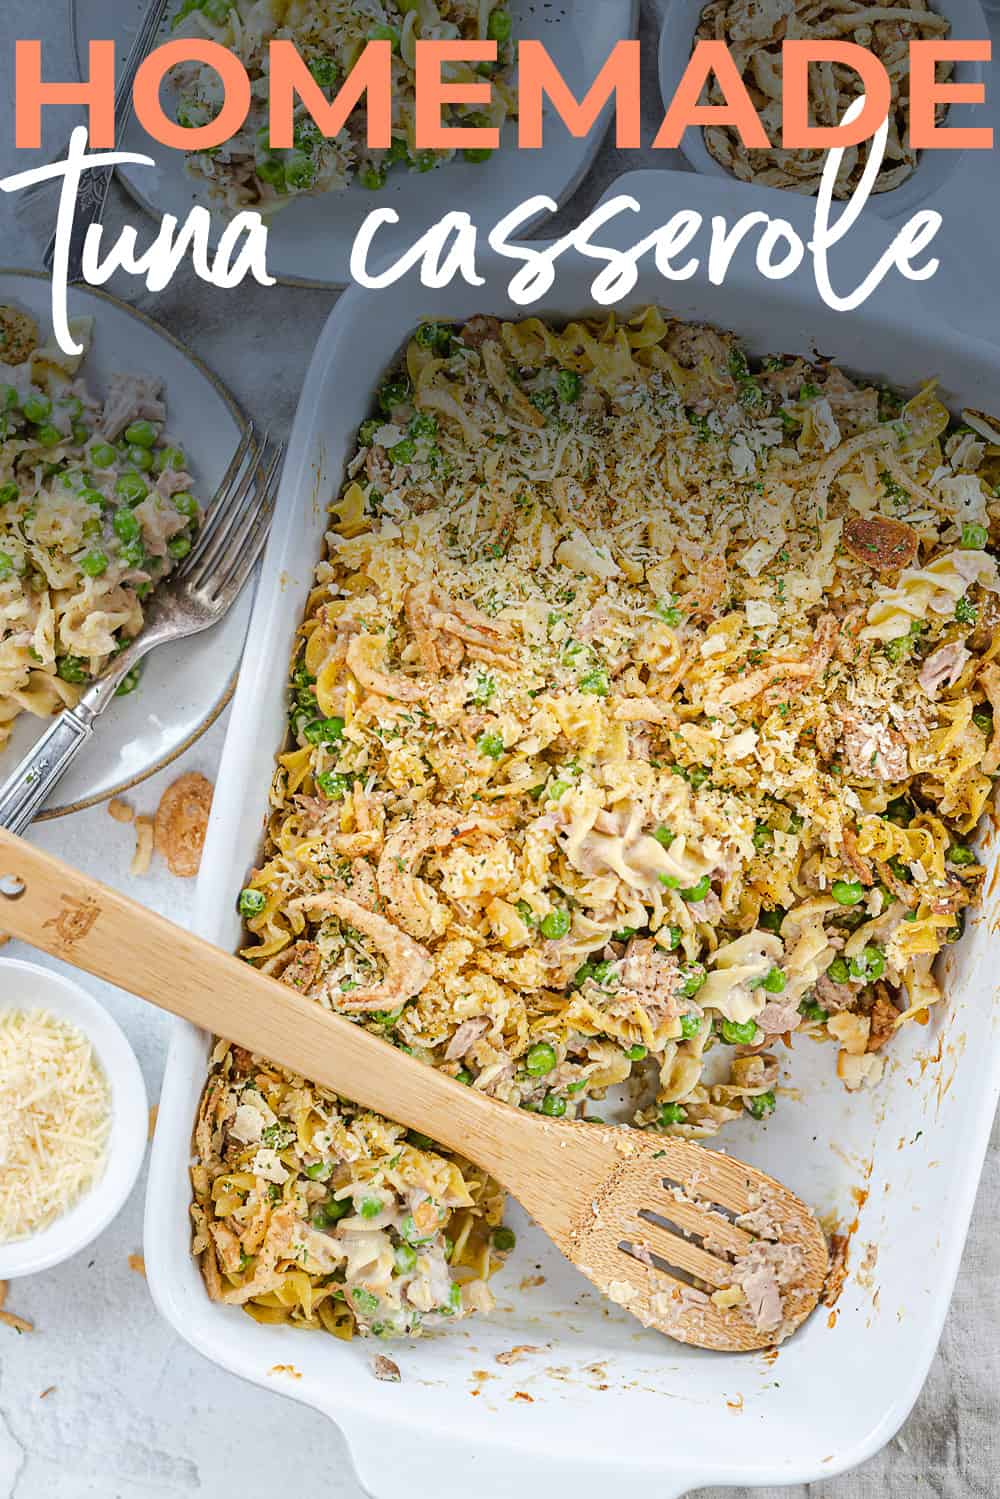 homemade tuna casserole in baking dish with text for Pinterest.